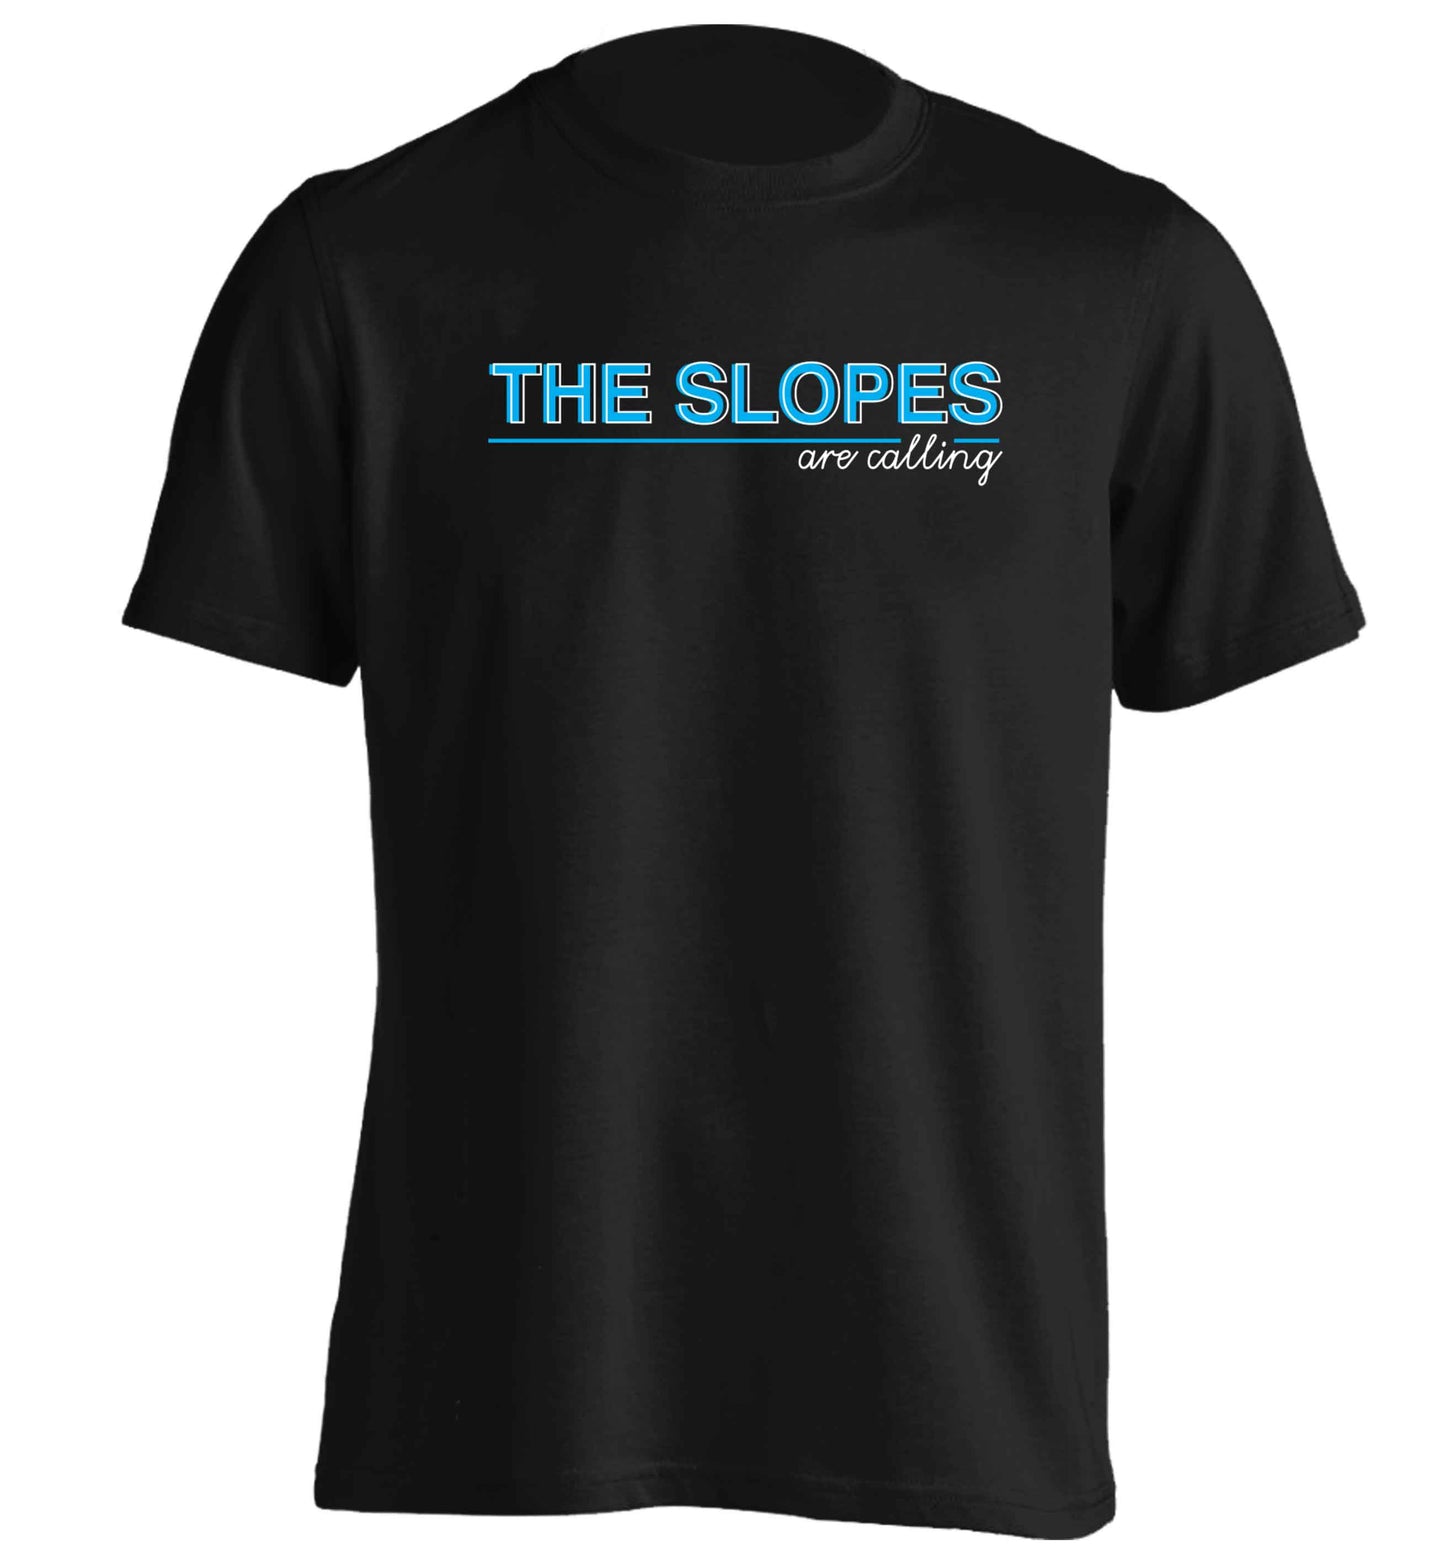 The slopes are calling adults unisex black Tshirt 2XL